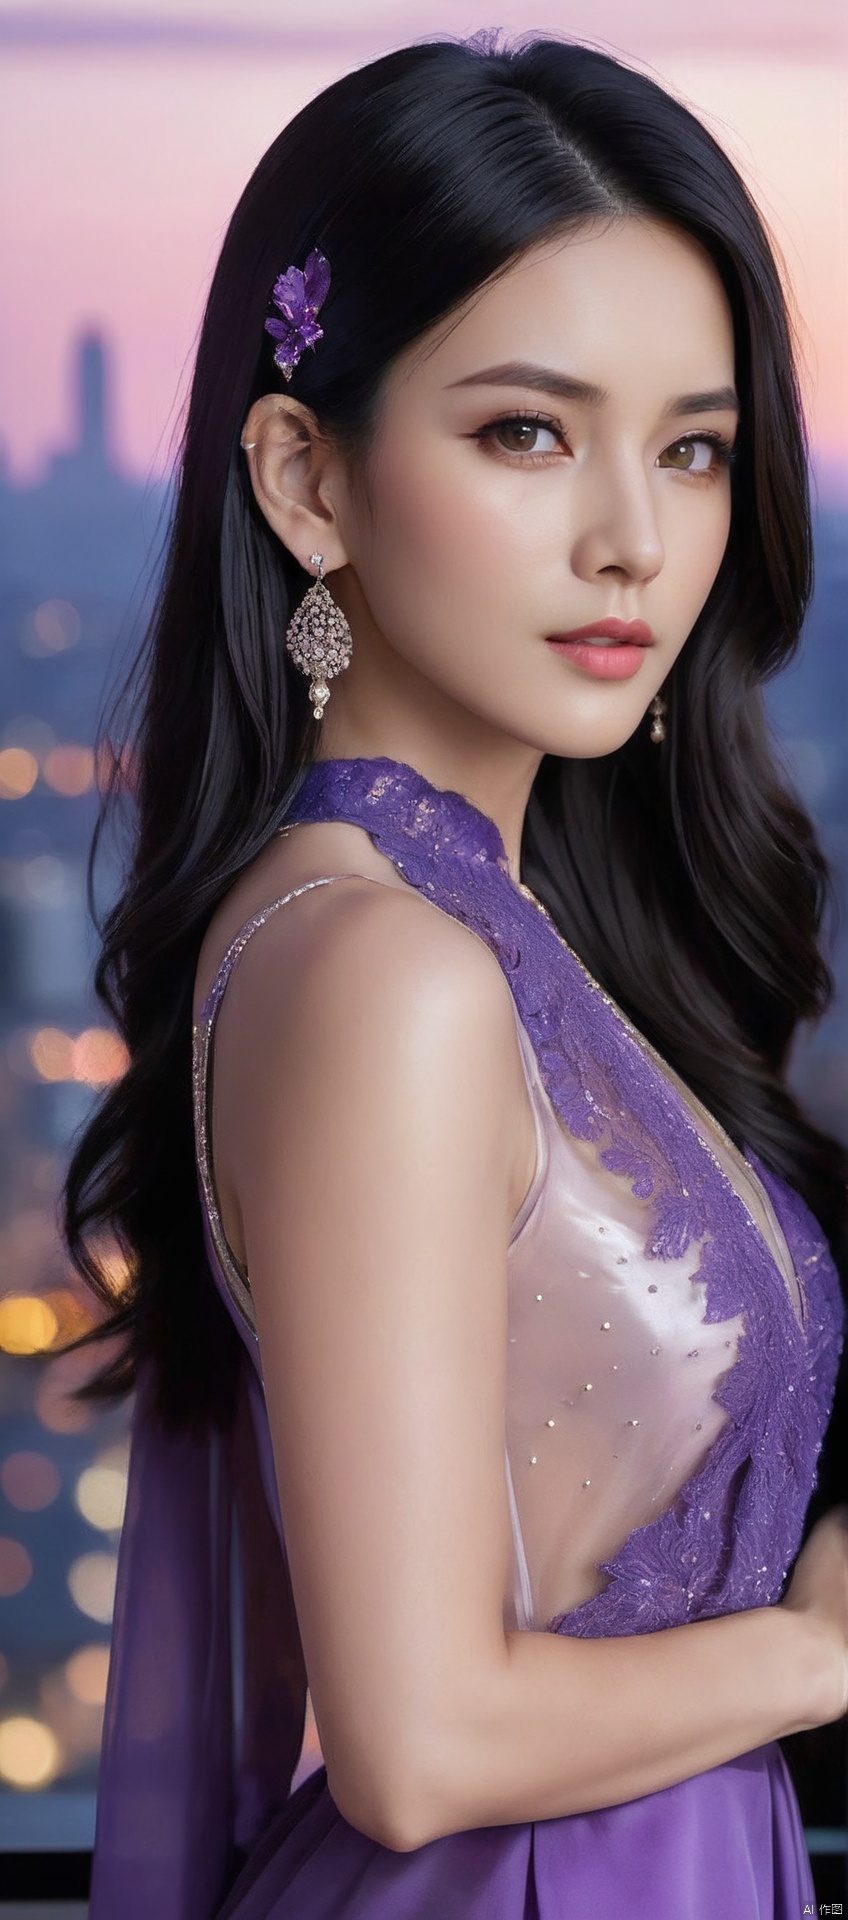 8k,RAW, Fujifilm XT3, masterpiece, best quality, photorealistic of 1girl ,solo, diamond stud earrings, long straight black hair, hazel eyes, serious expression, slender figure, wearing a purple blouse, standing against a city skyline at night,masterpiece,1girl,purple dress,(upper body shot), (upper body view),best quality,long hair, black hair,dodger see through clothes,purple transparent shawl,earrings,beautiful symmetrical face,in the style of elegant clothing,skin white and smooth,high heels,g001,